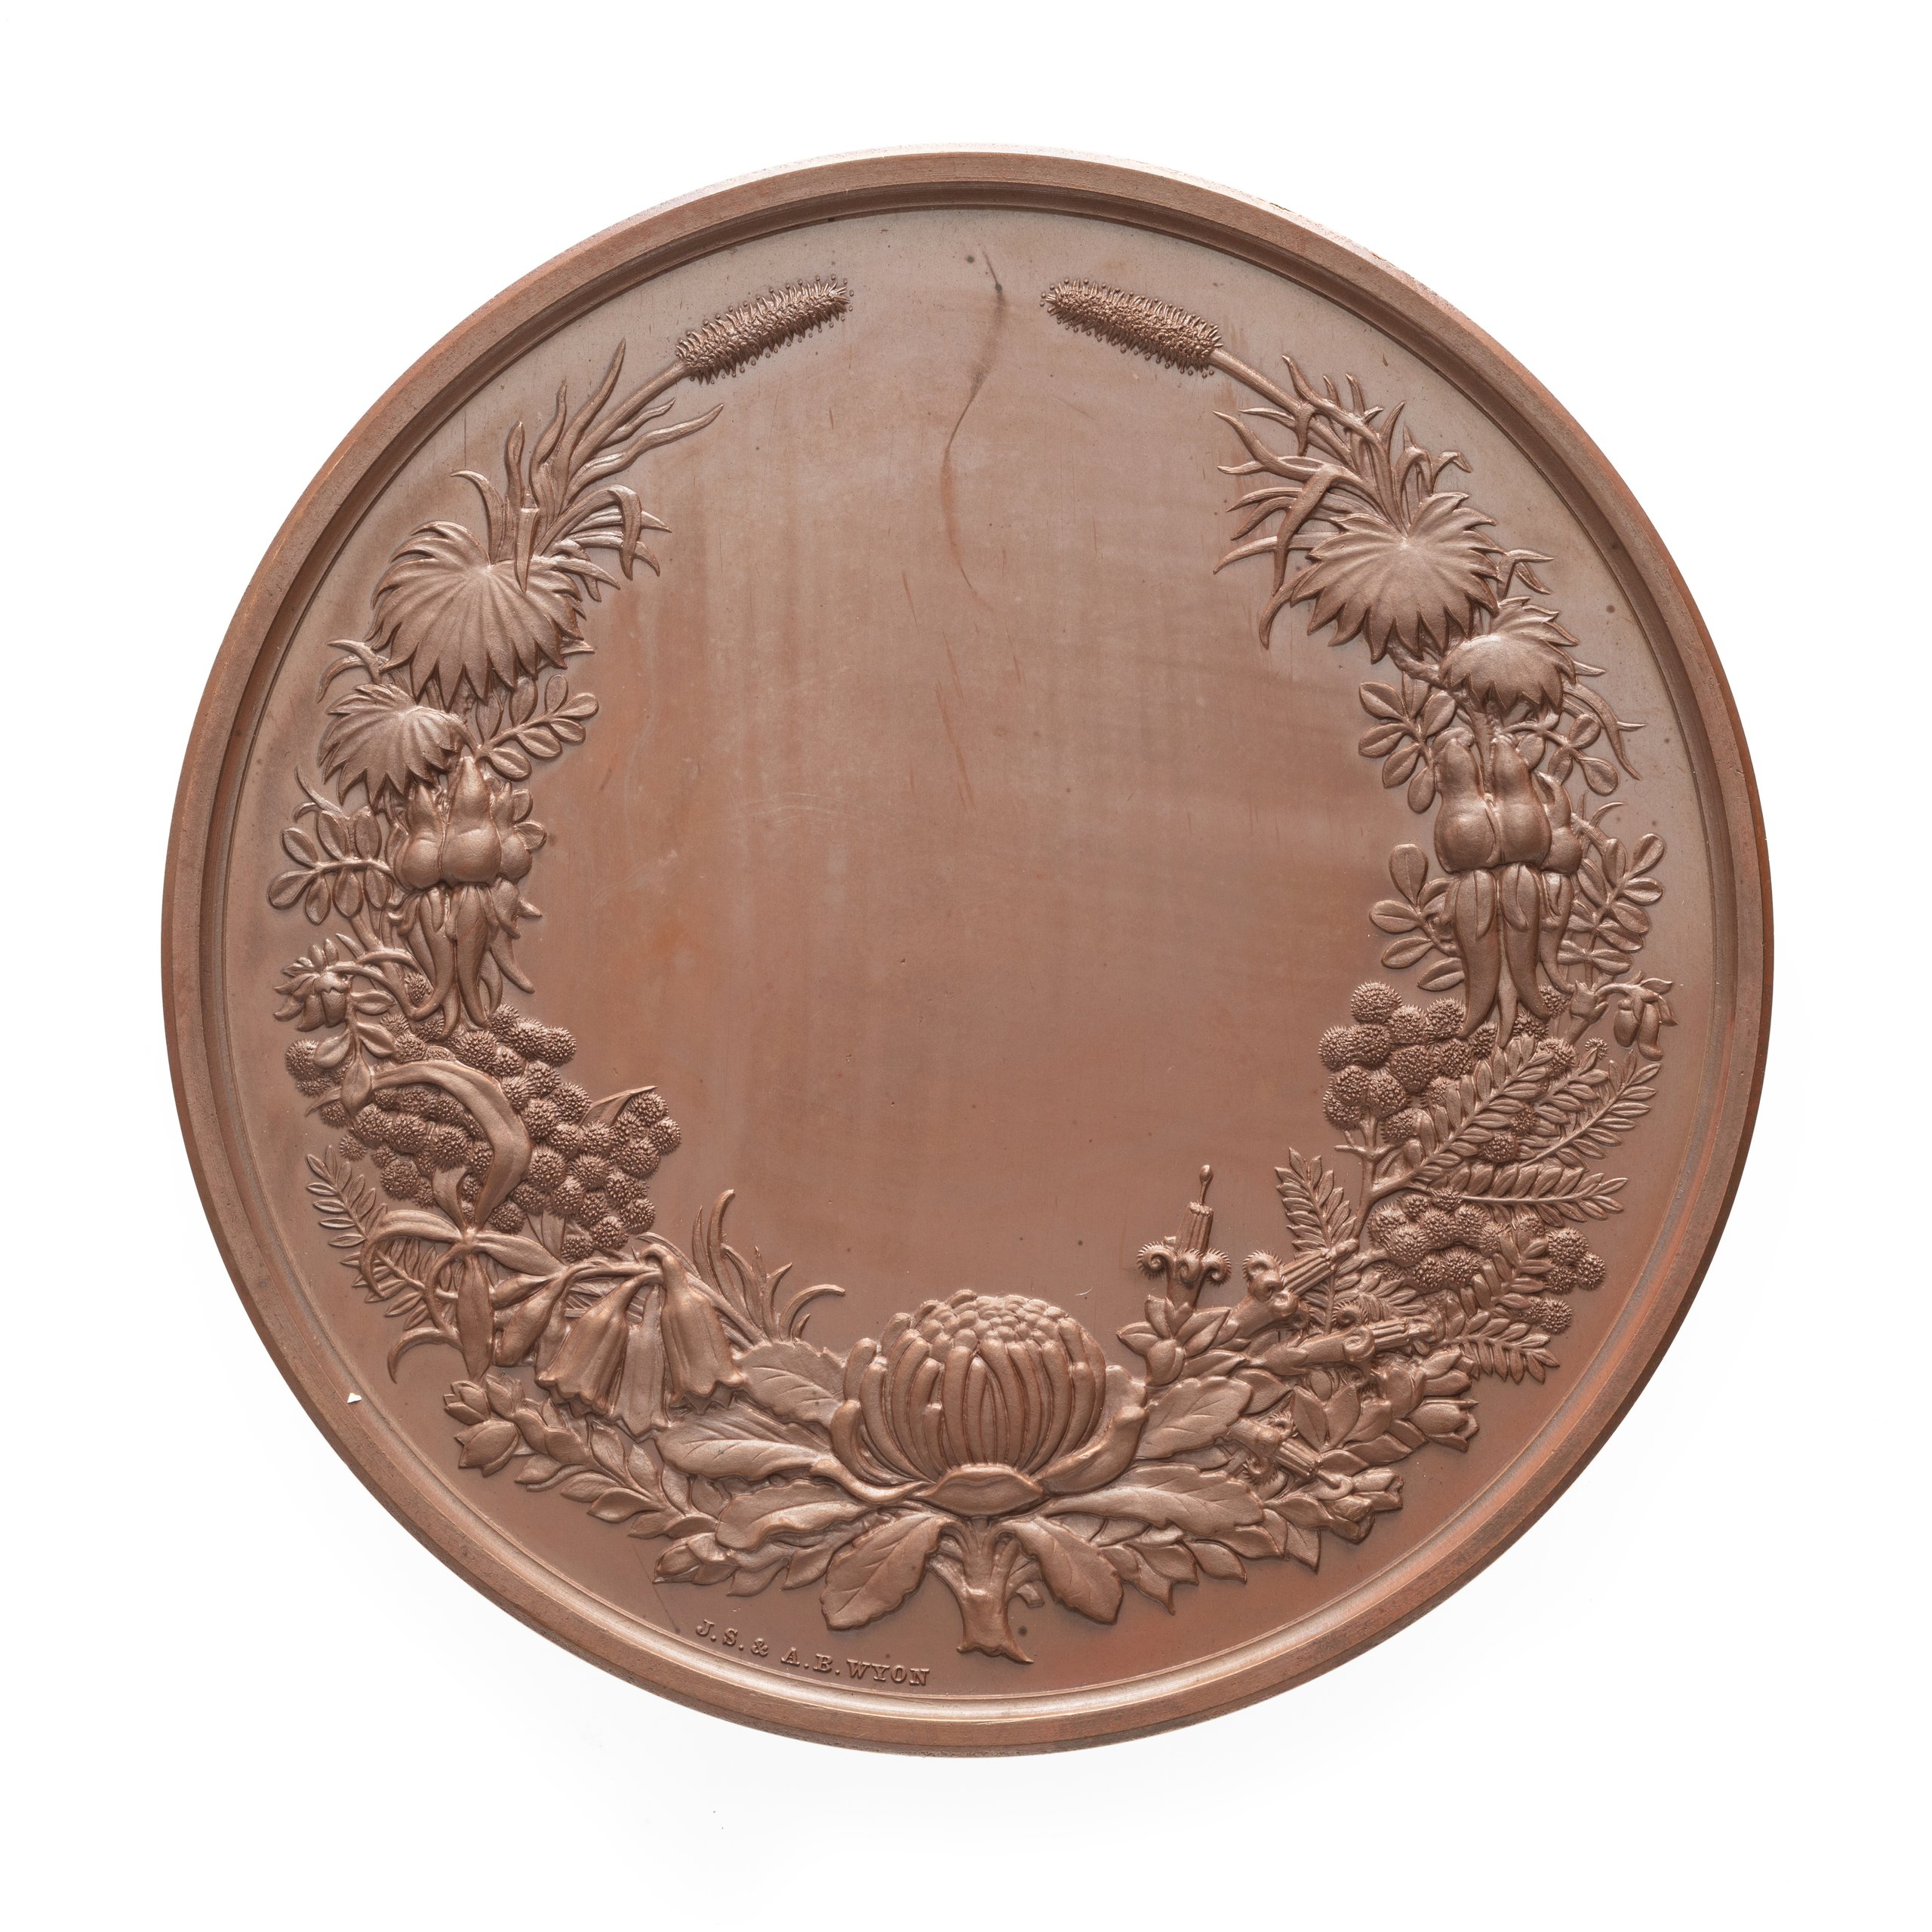 Prize medal for the Sydney International Exhibition